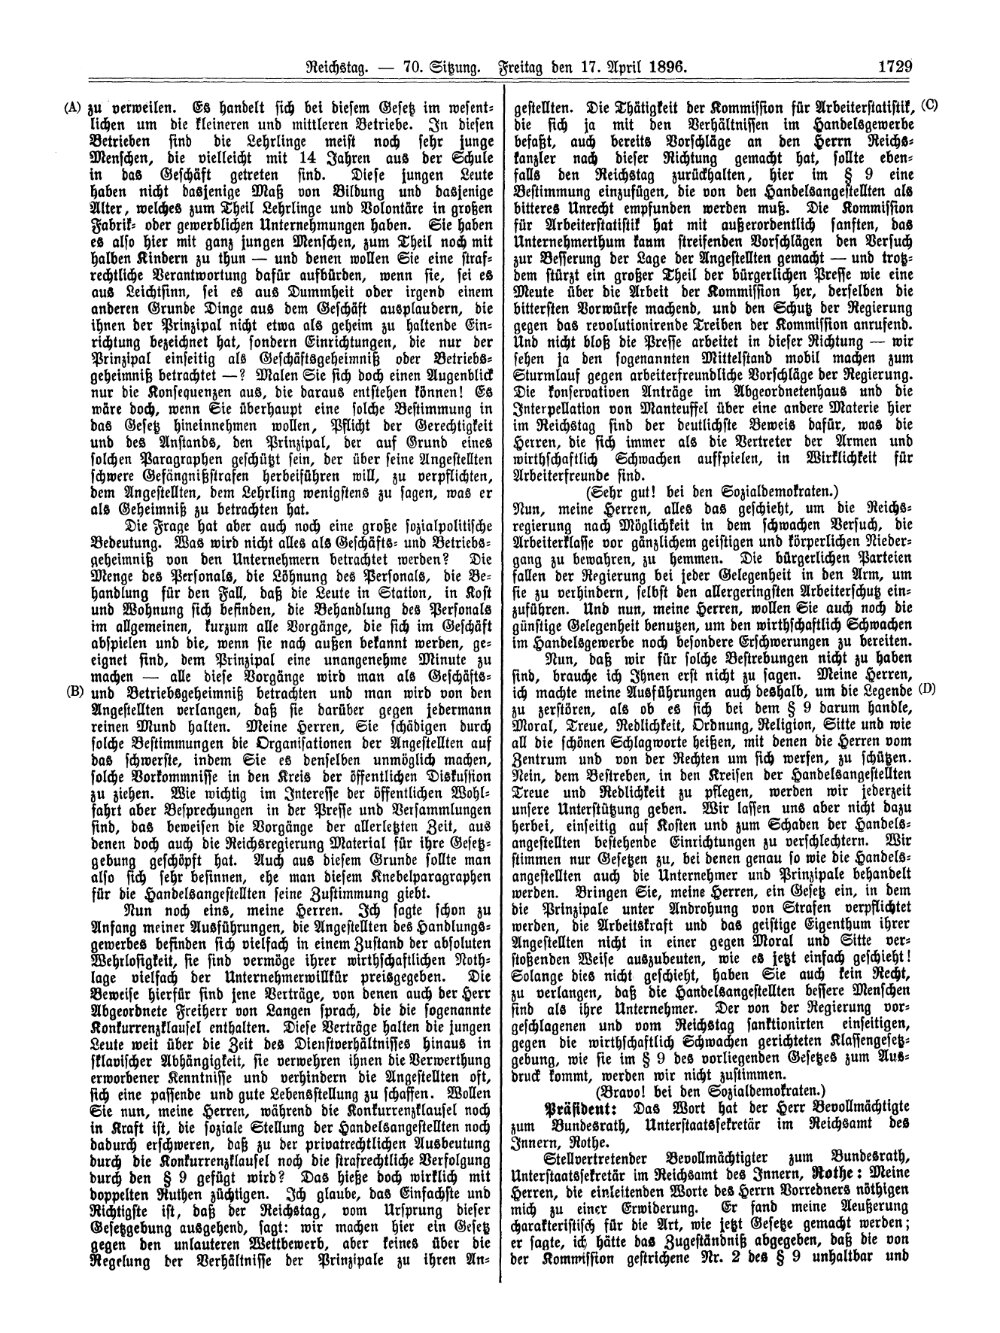 Scan of page 1729